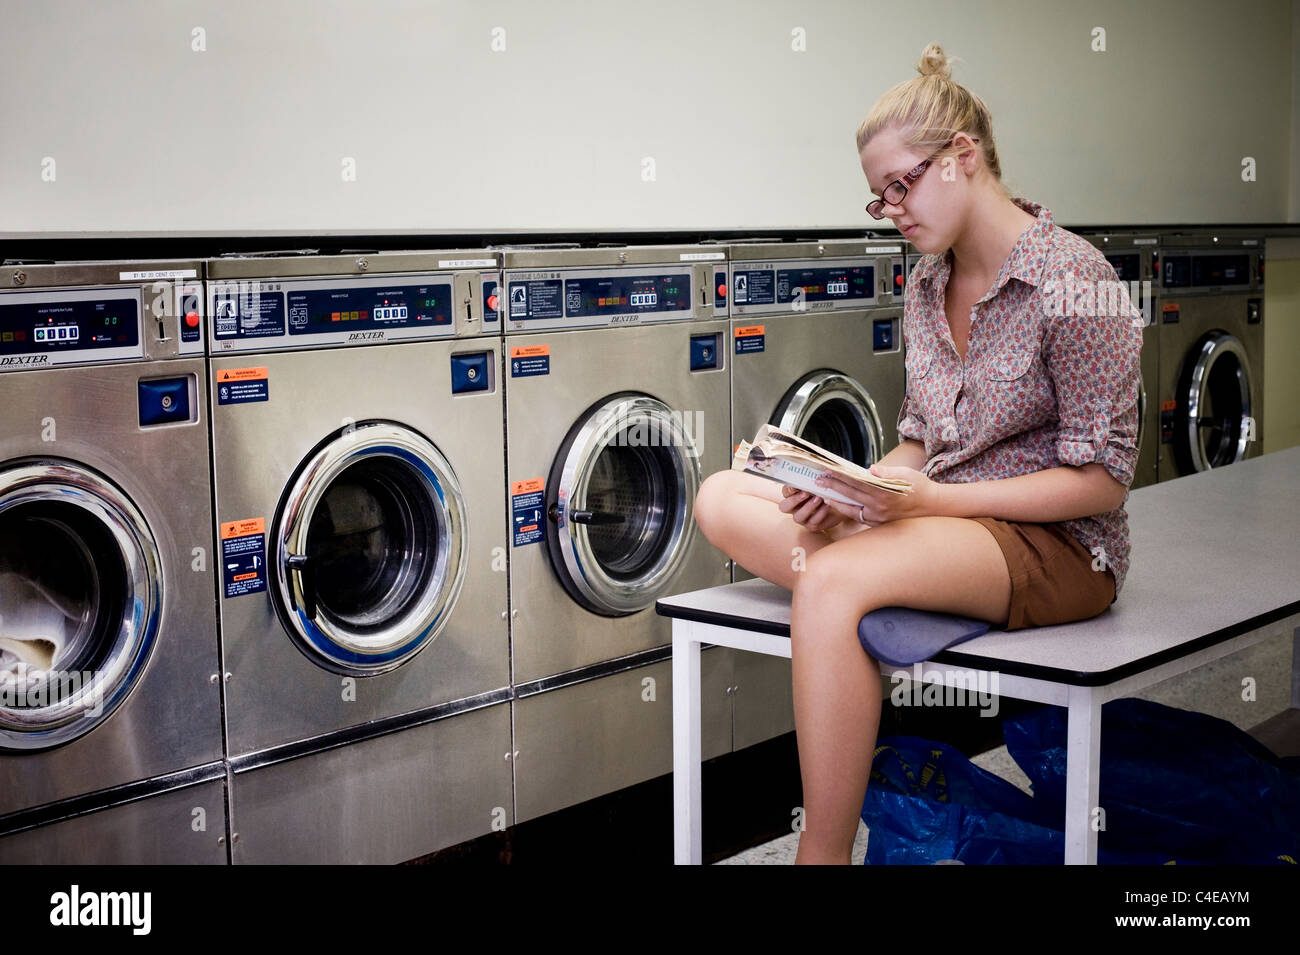 Girl reading book at laundromat Banque D'Images